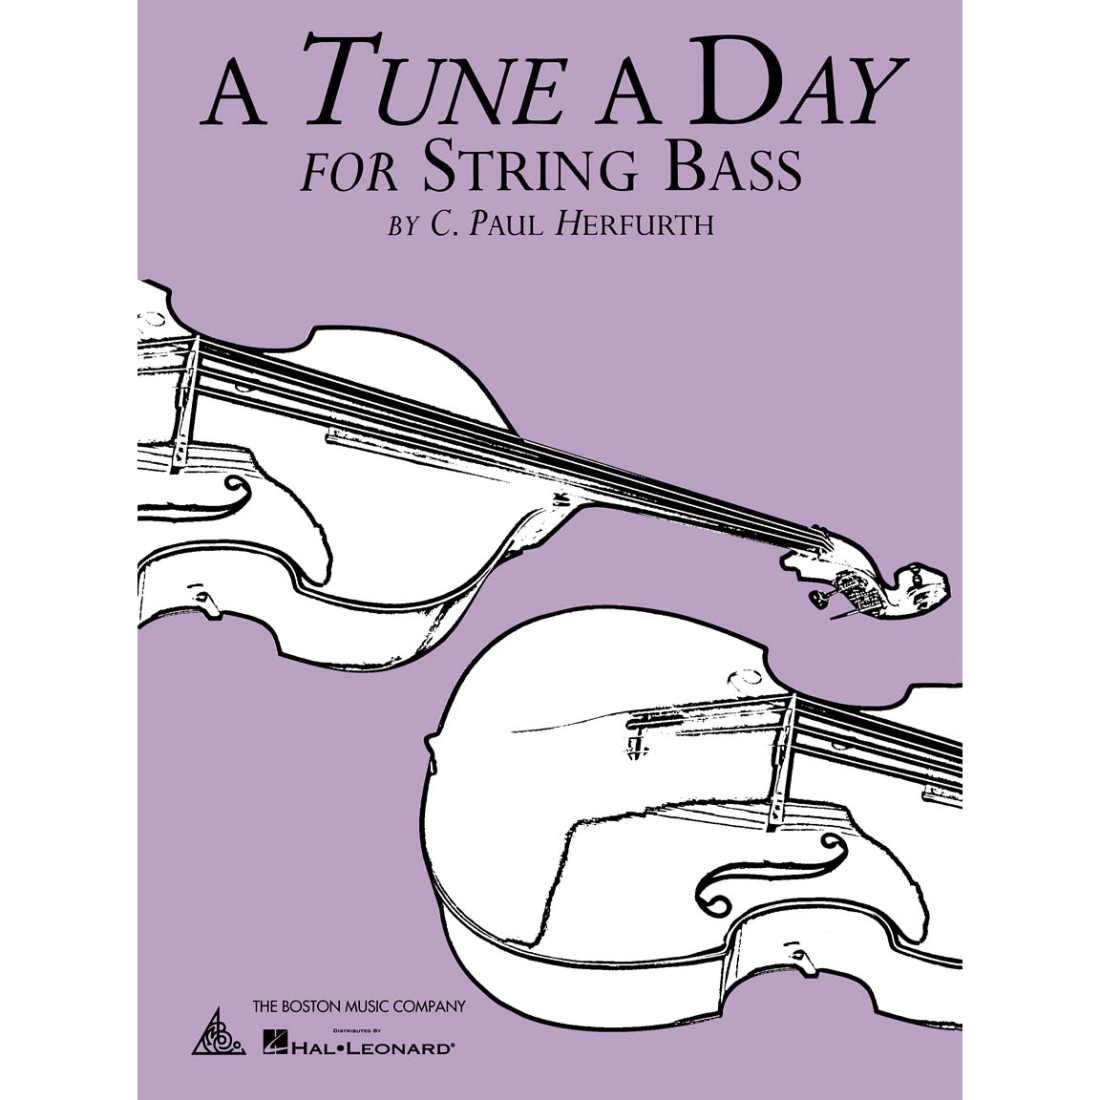 Purple "A Tune A Day" bass method book with black and white drawn bass